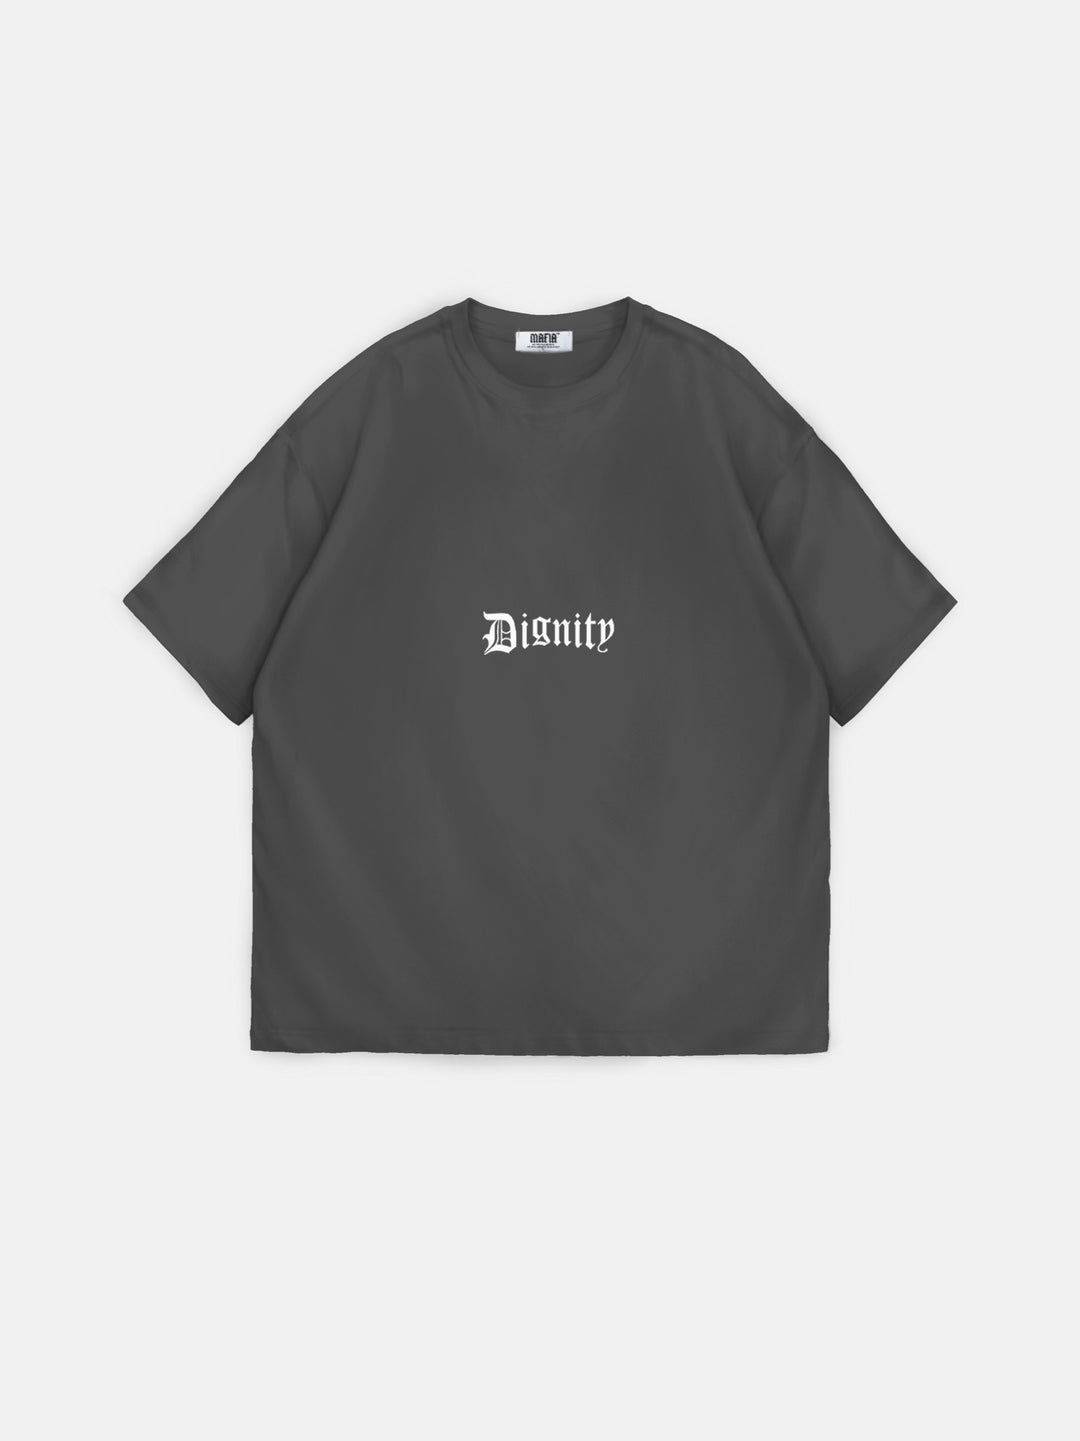 Oversize Dignity T-shirt - Anthracite